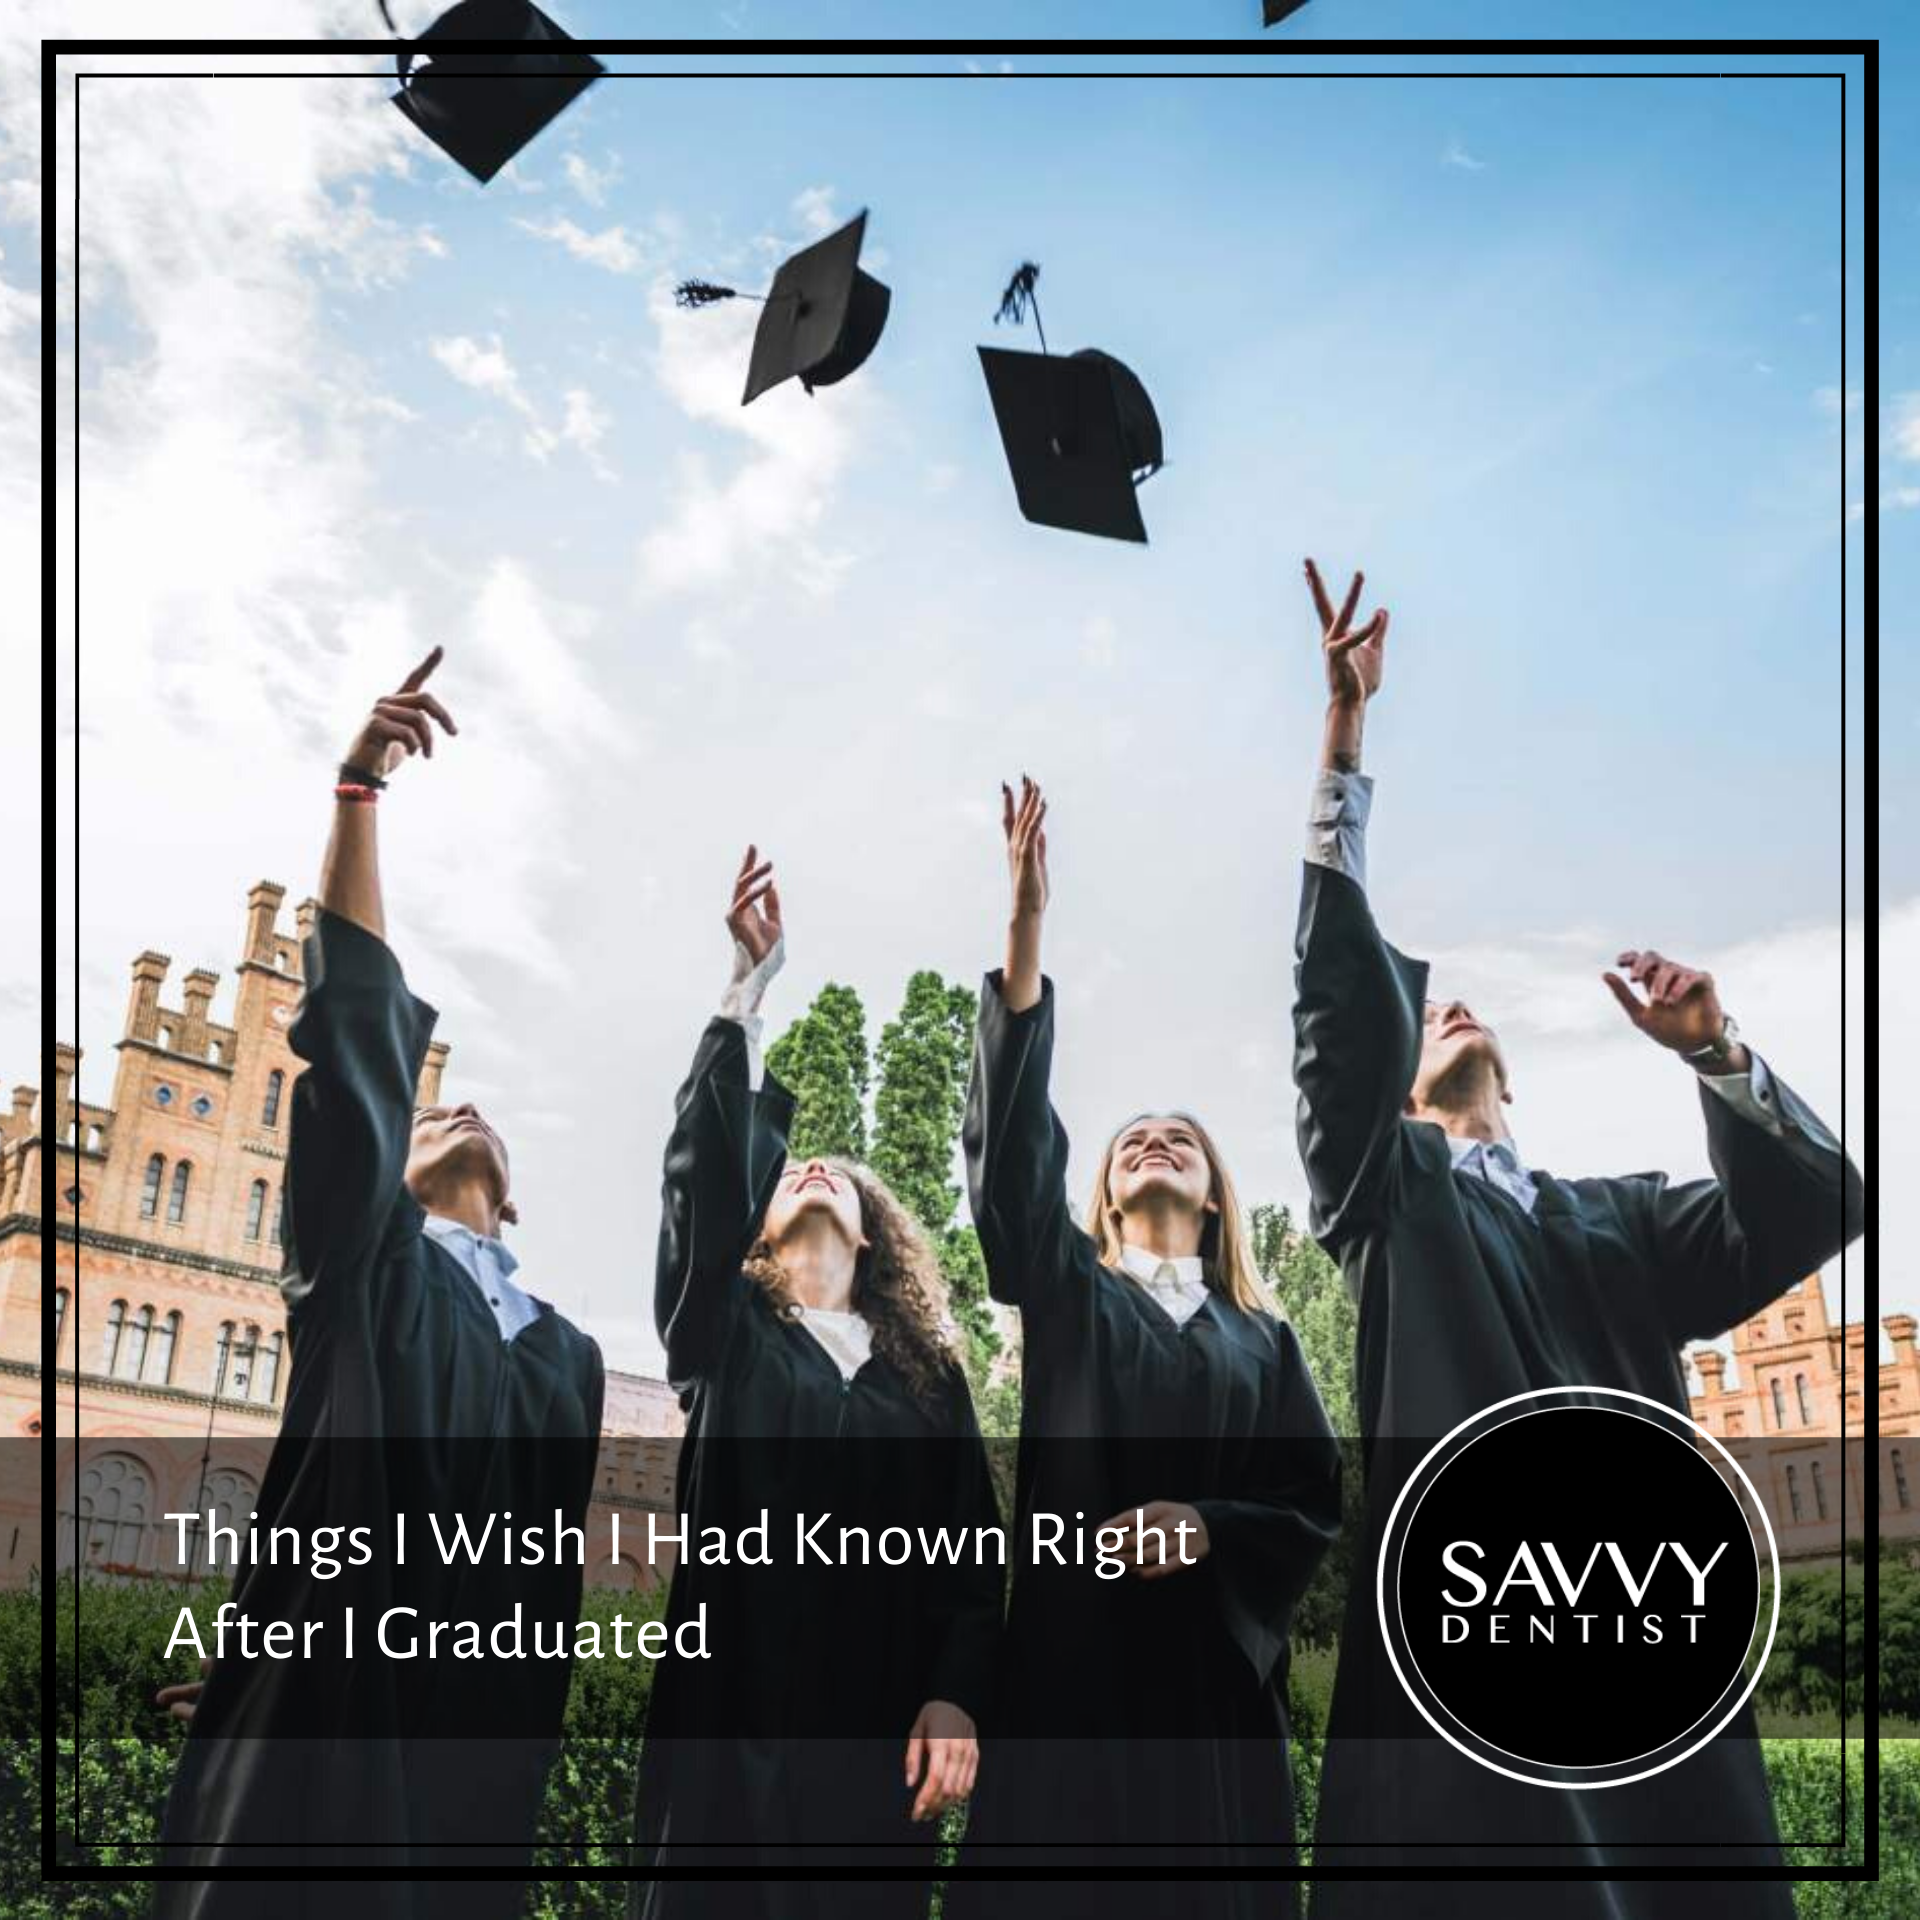 Things I Wish I Had Known Right After I Graduated